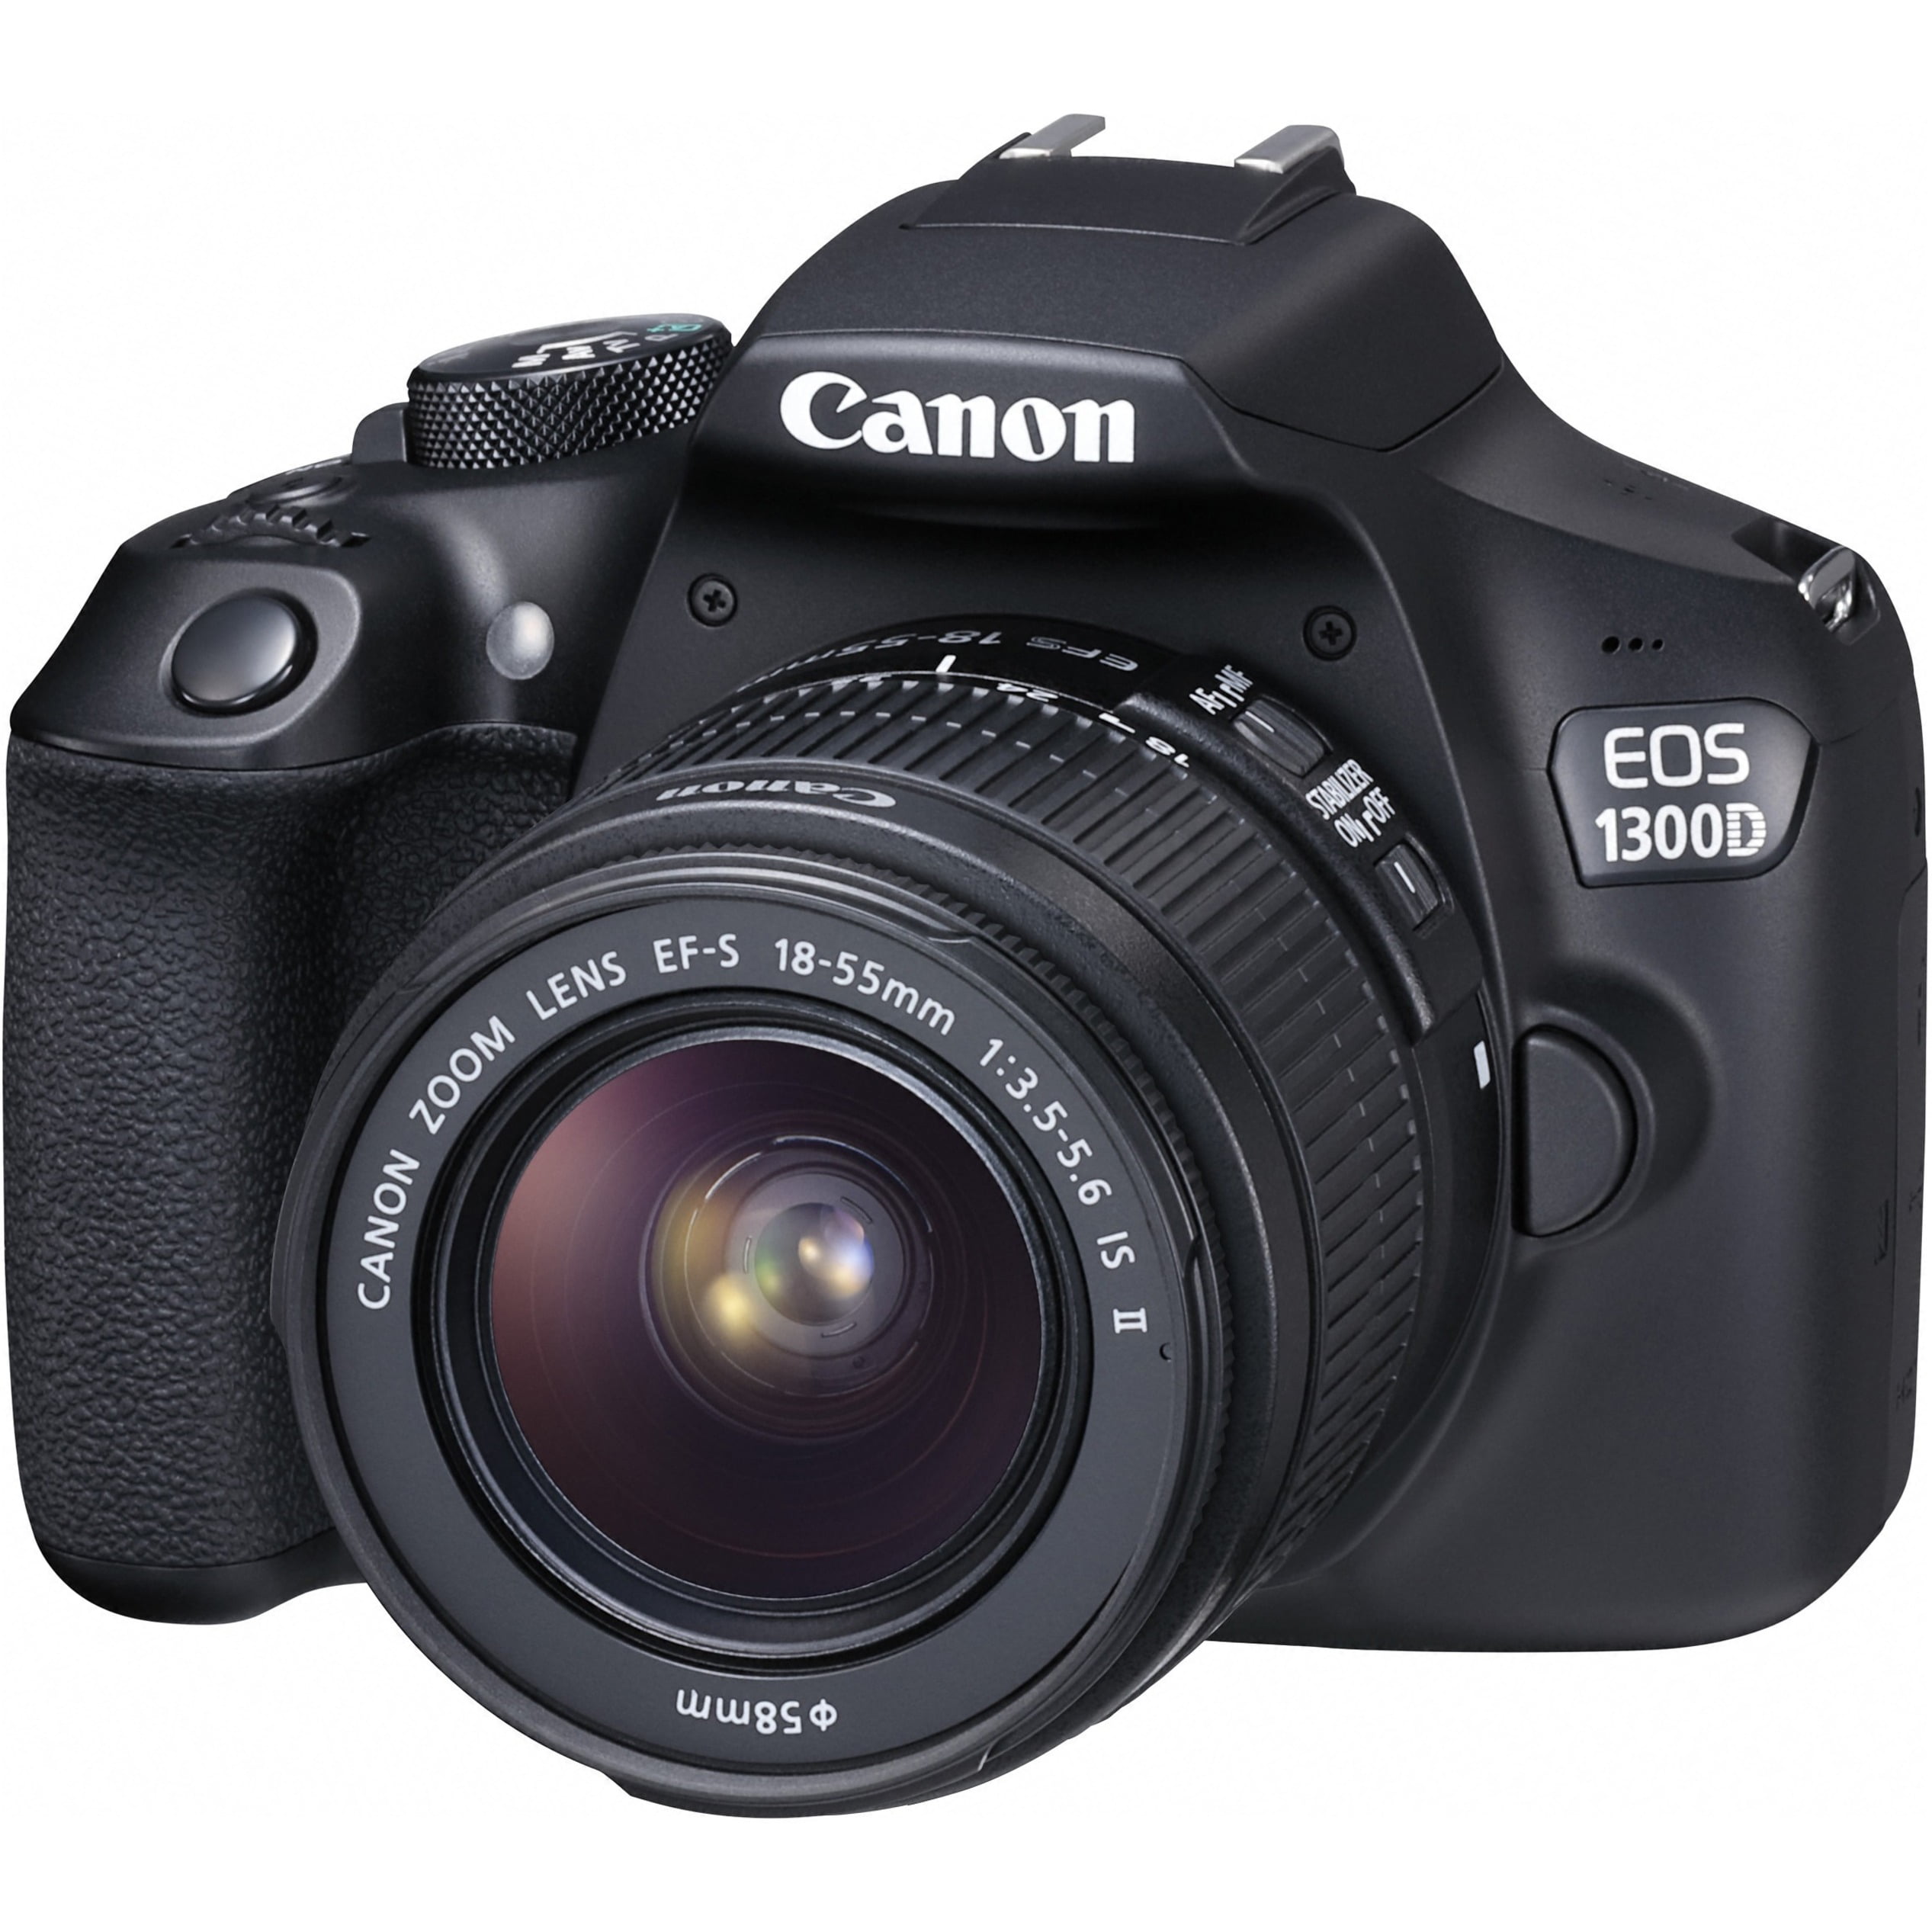 Canon EOS 1300D - EOS Digital SLR and Compact System Cameras - Canon Spain